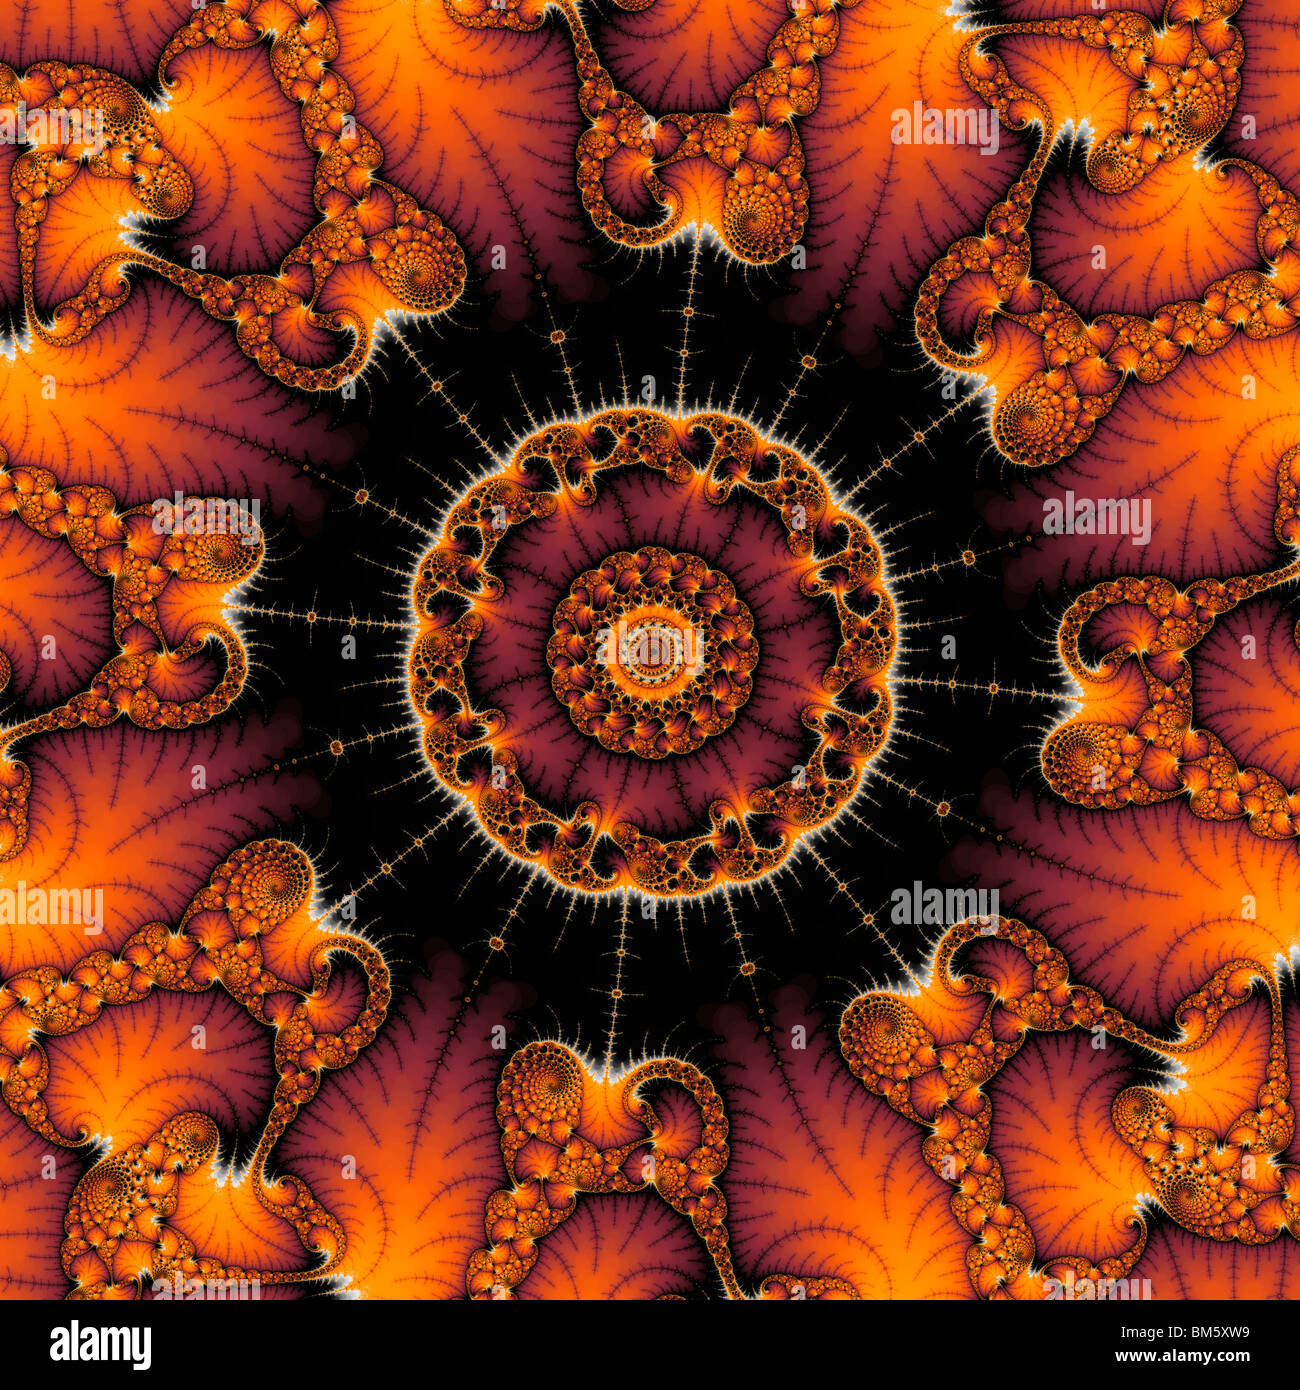 The Mandelbrot Set contains an infinite number of smaller copies of itself, surrounded by complex patterns. Stock Photo